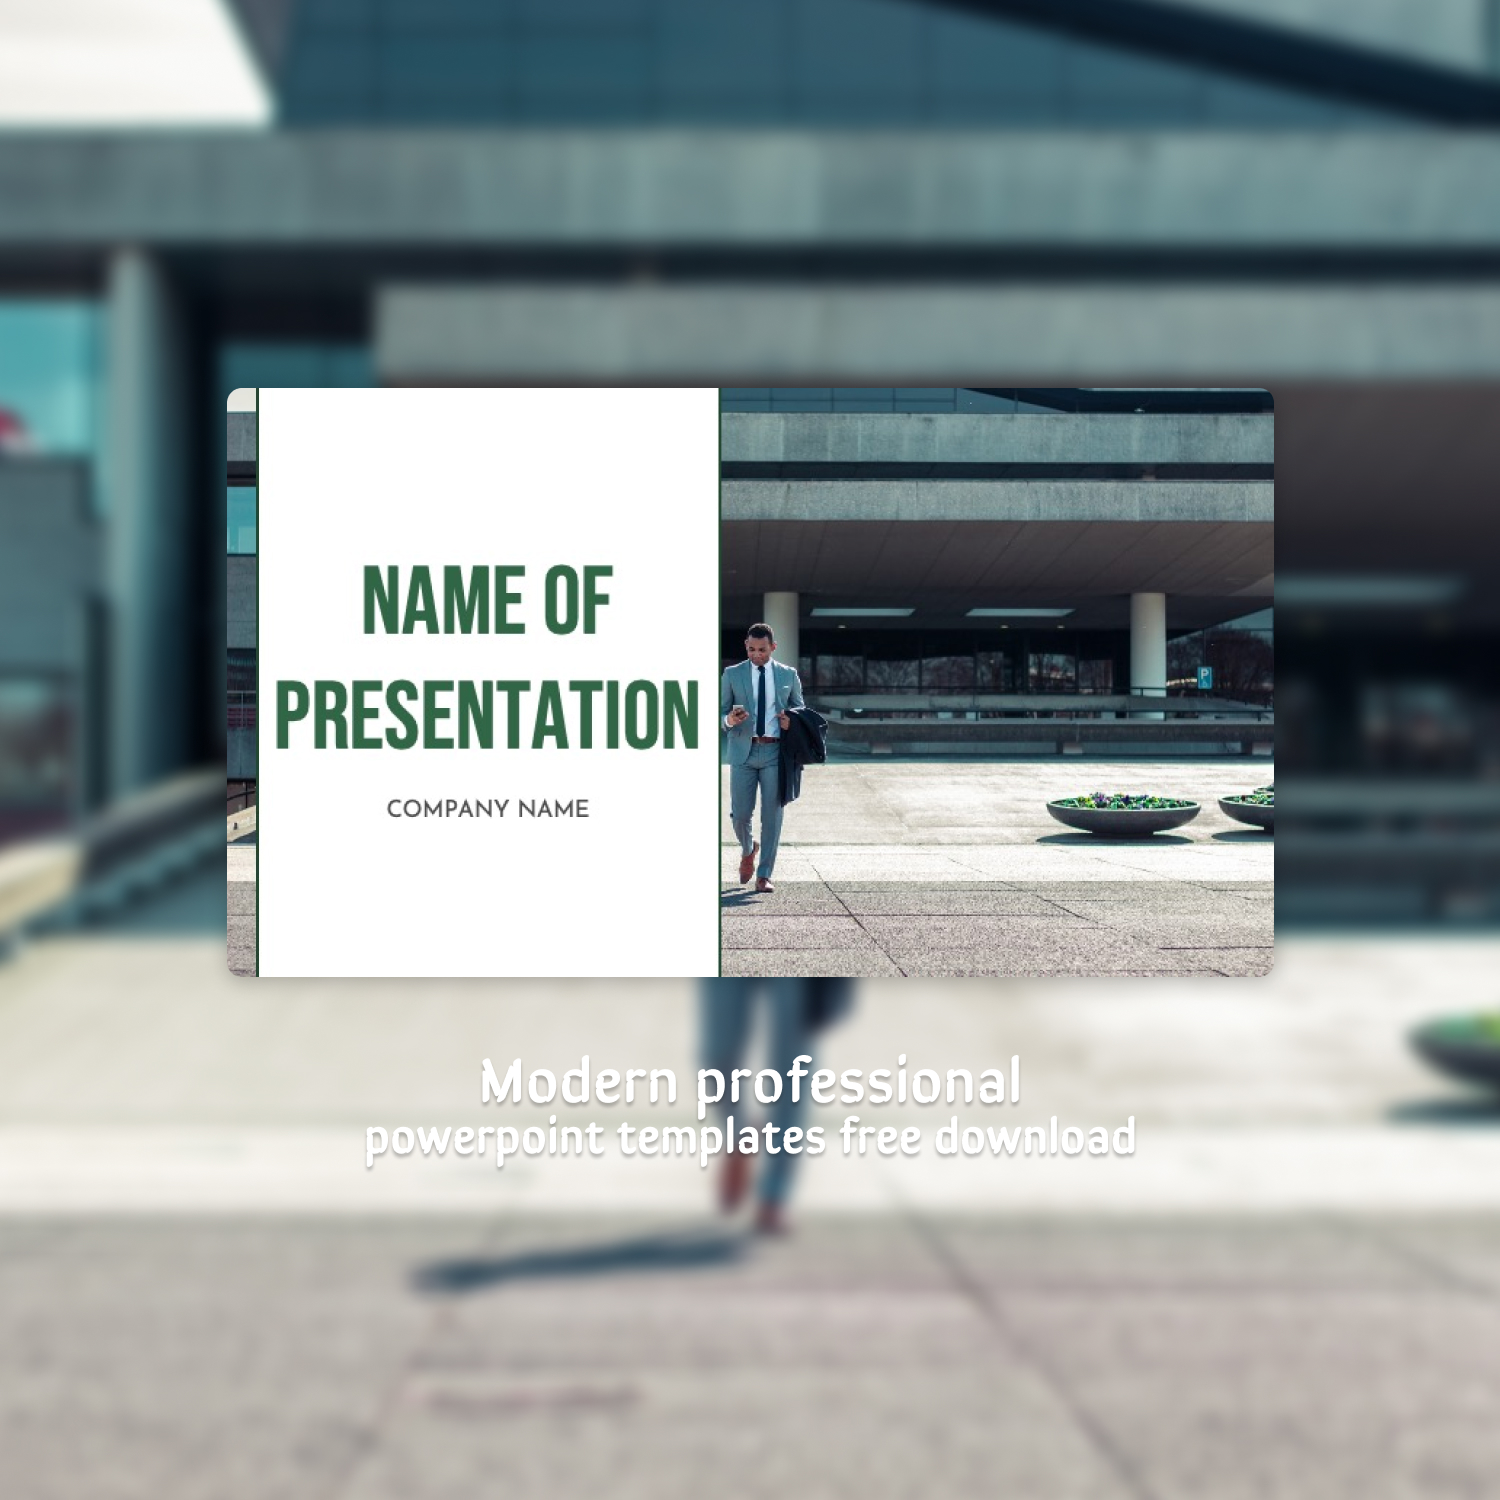 Prints of modern professional powerpoint templates free download.